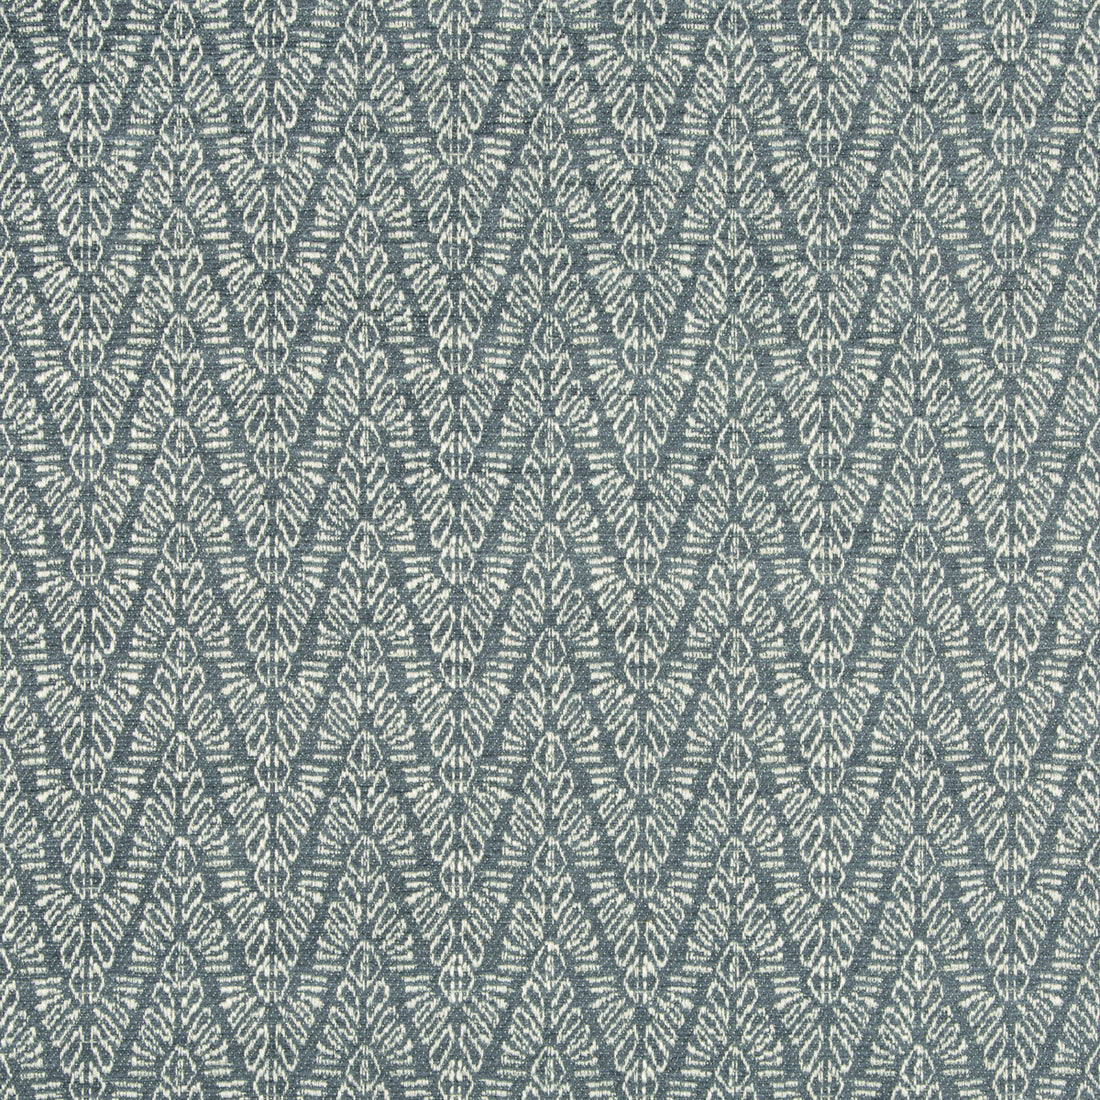 Topaz Weave fabric in sea wave color - pattern GWF-3750.5.0 - by Lee Jofa Modern in the Gems collection